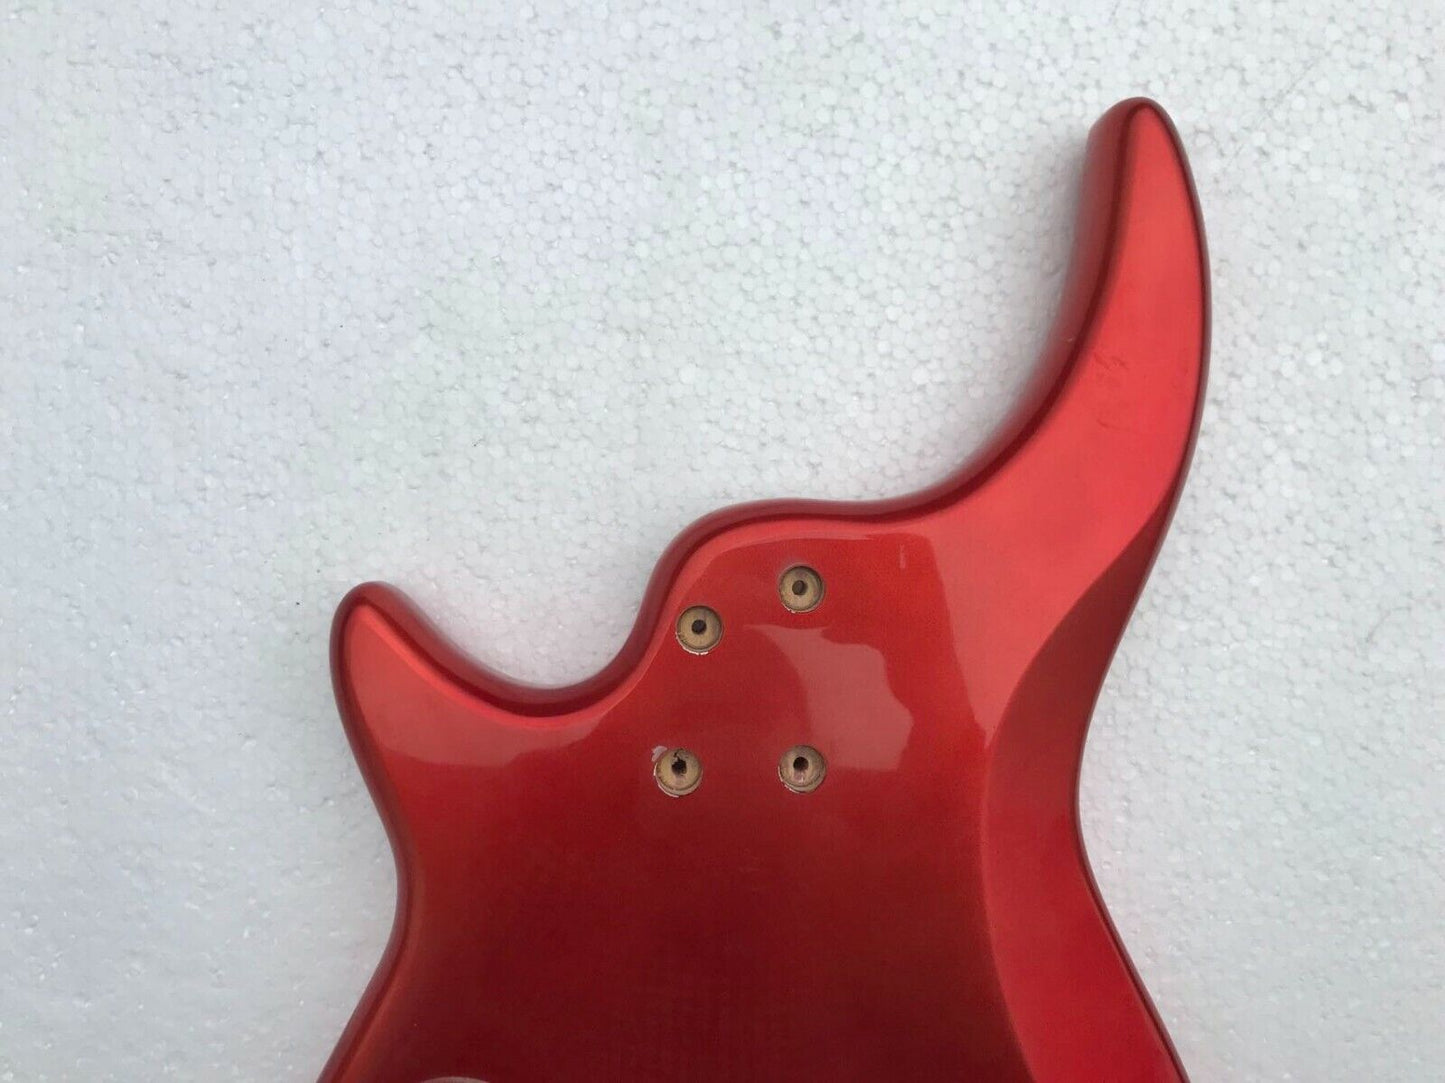 4 String Electric Bass Glossy Red Body DIY Project